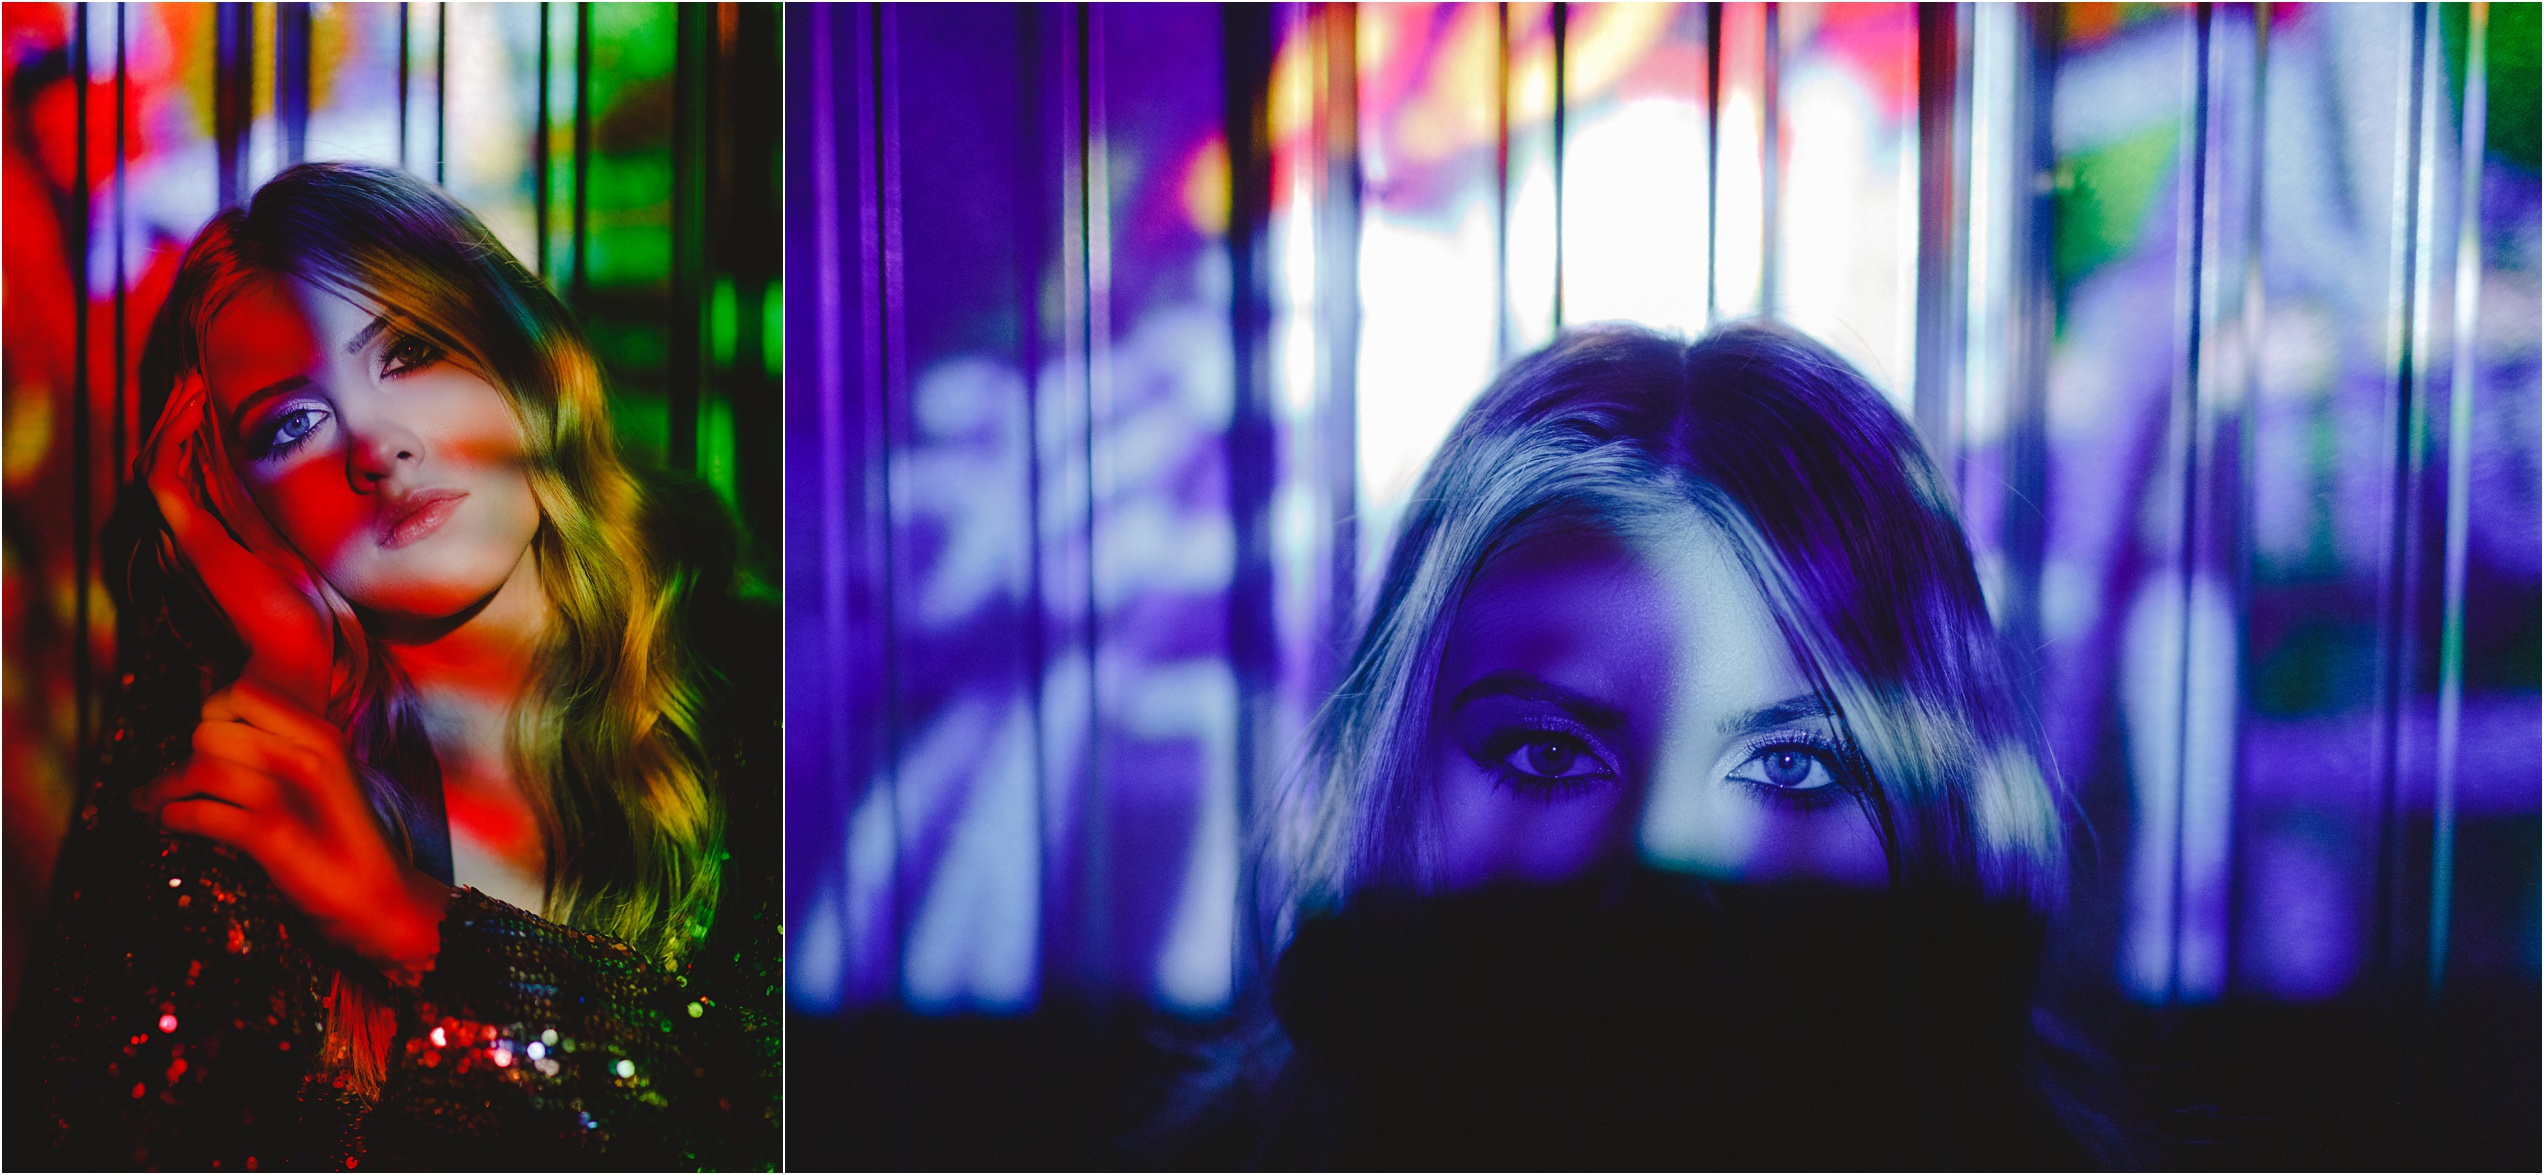 Collage of Andrina with projected colorful light beams hitting her face in her senior photoshoot.